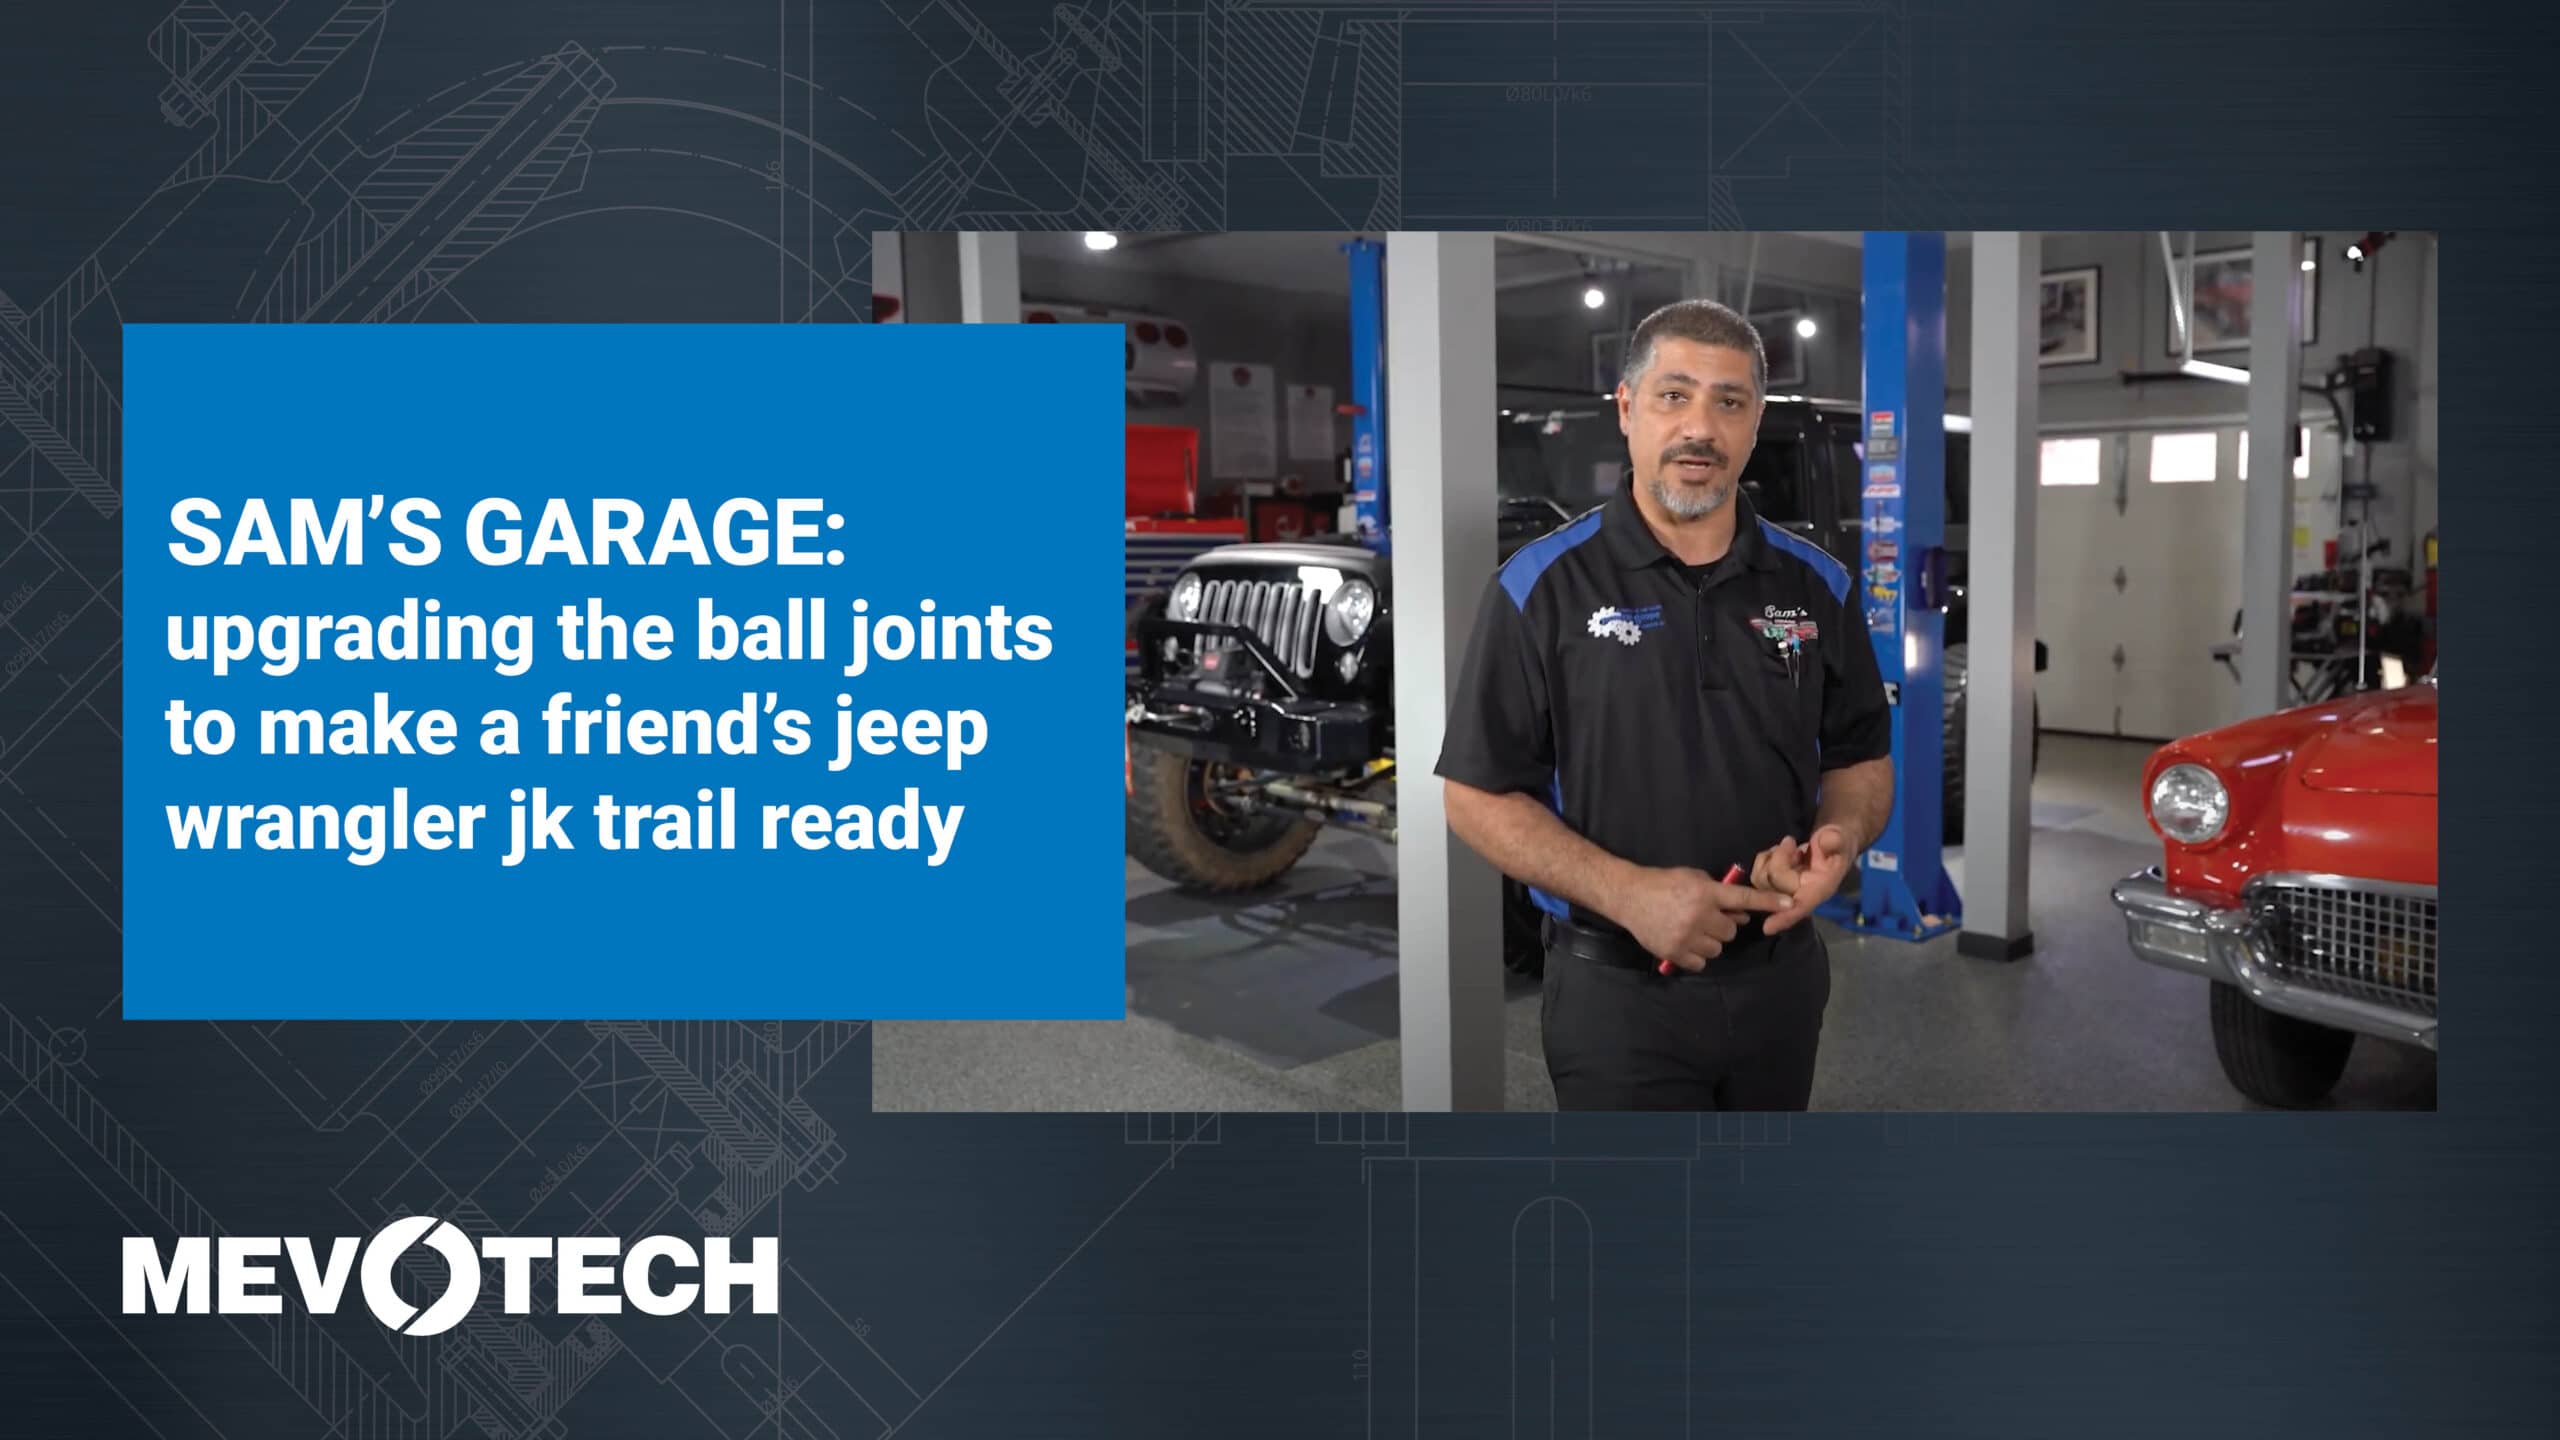 SAM’S GARAGE: UPGRADING THE BALL JOINTS TO MAKE A FRIEND’S JEEP WRANGLER JK TRAIL READY